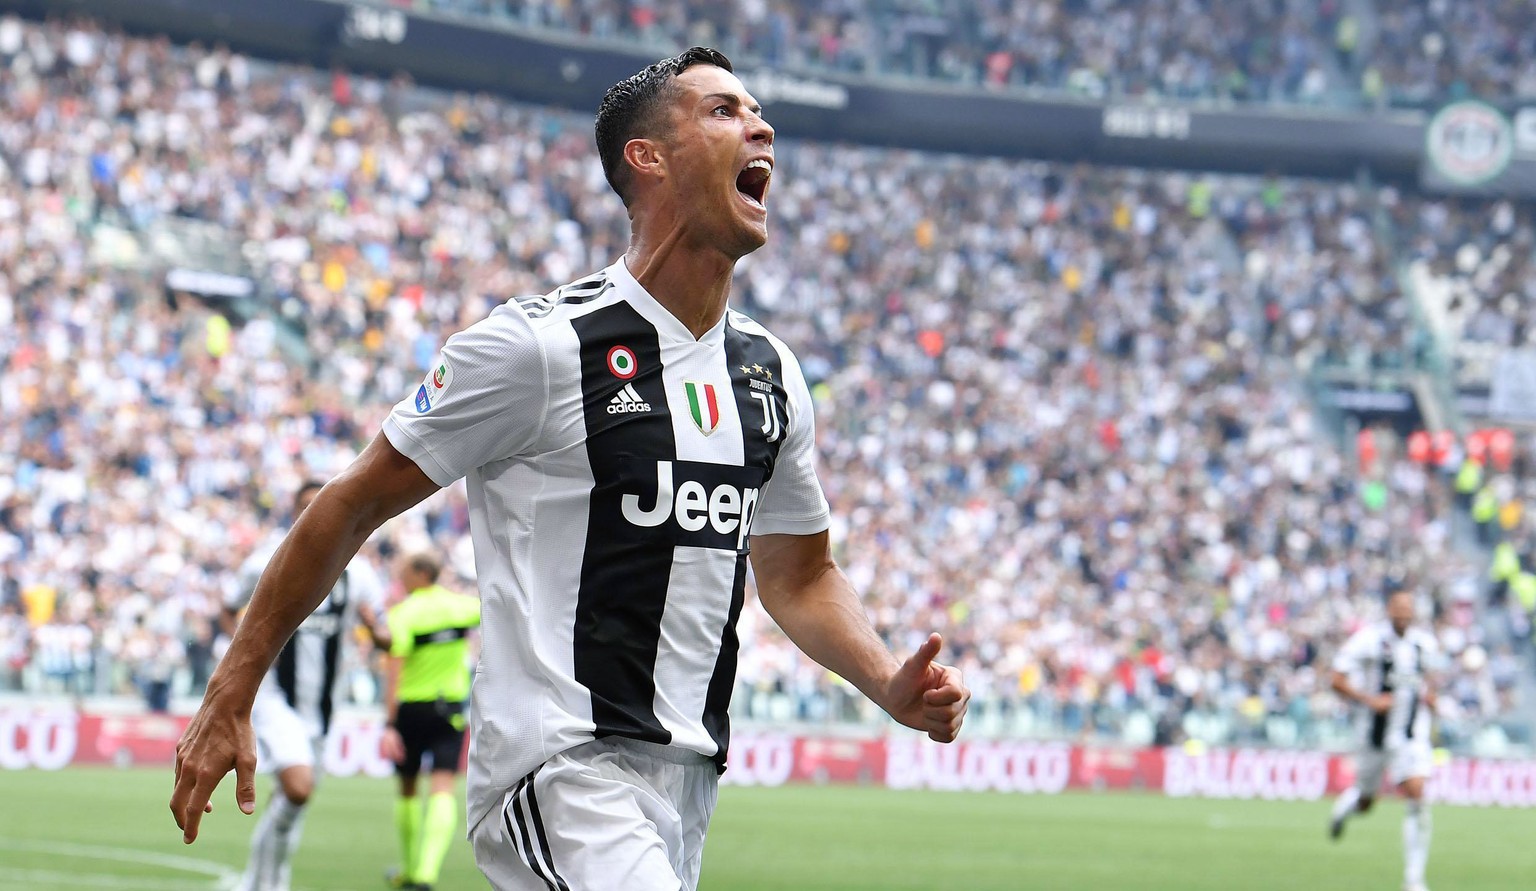 FILE - In this Sept. 16, 2018, file photo, Juventus&#039; Cristiano Ronaldo celebrates after scoring during a Serie A soccer match against Sassuolo in Turin, Italy. Ronaldo lost a bid for dismissal or ...